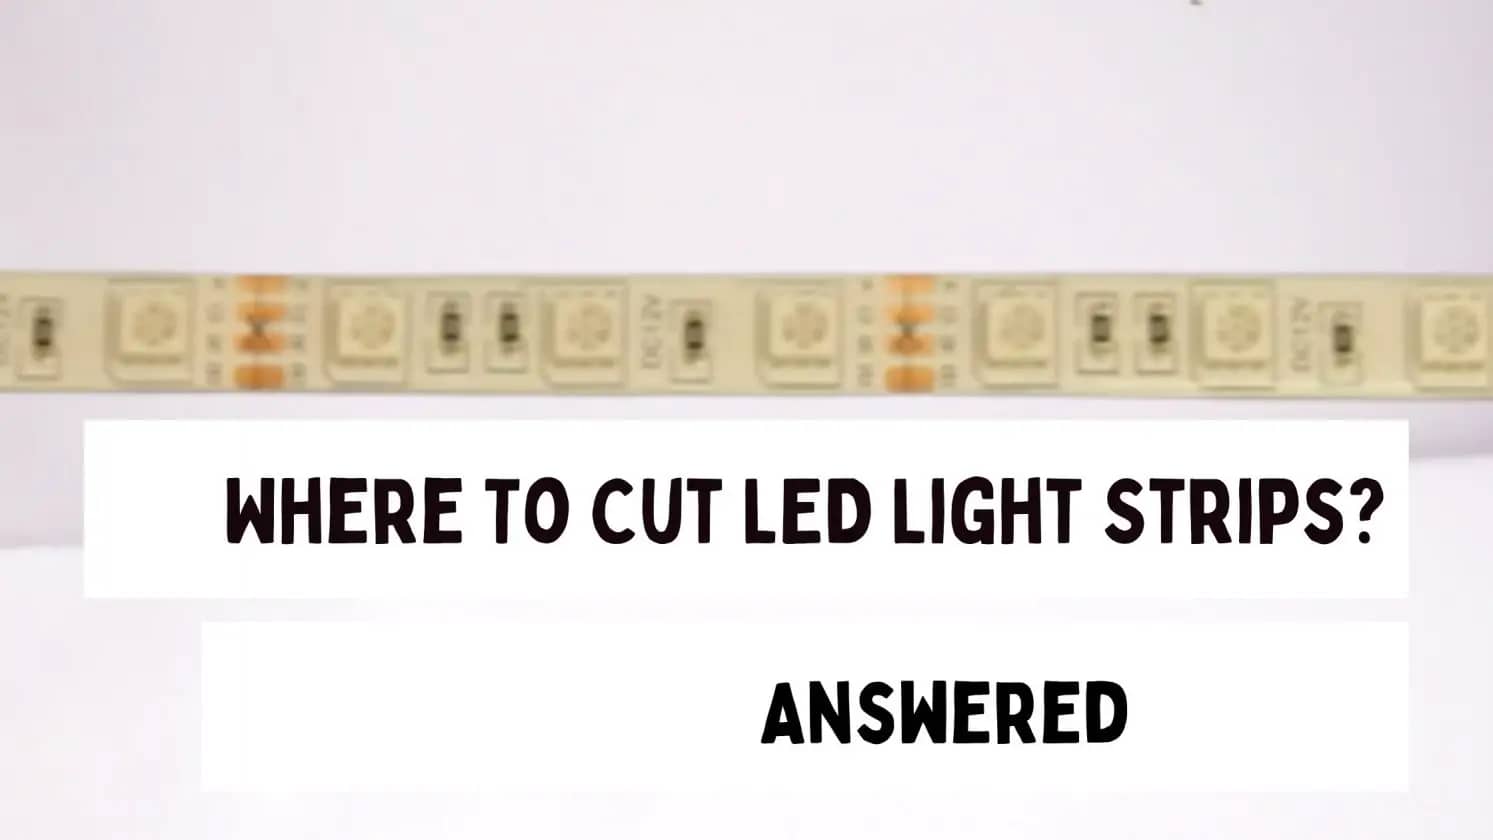 Where To Cut LED Light Strips?